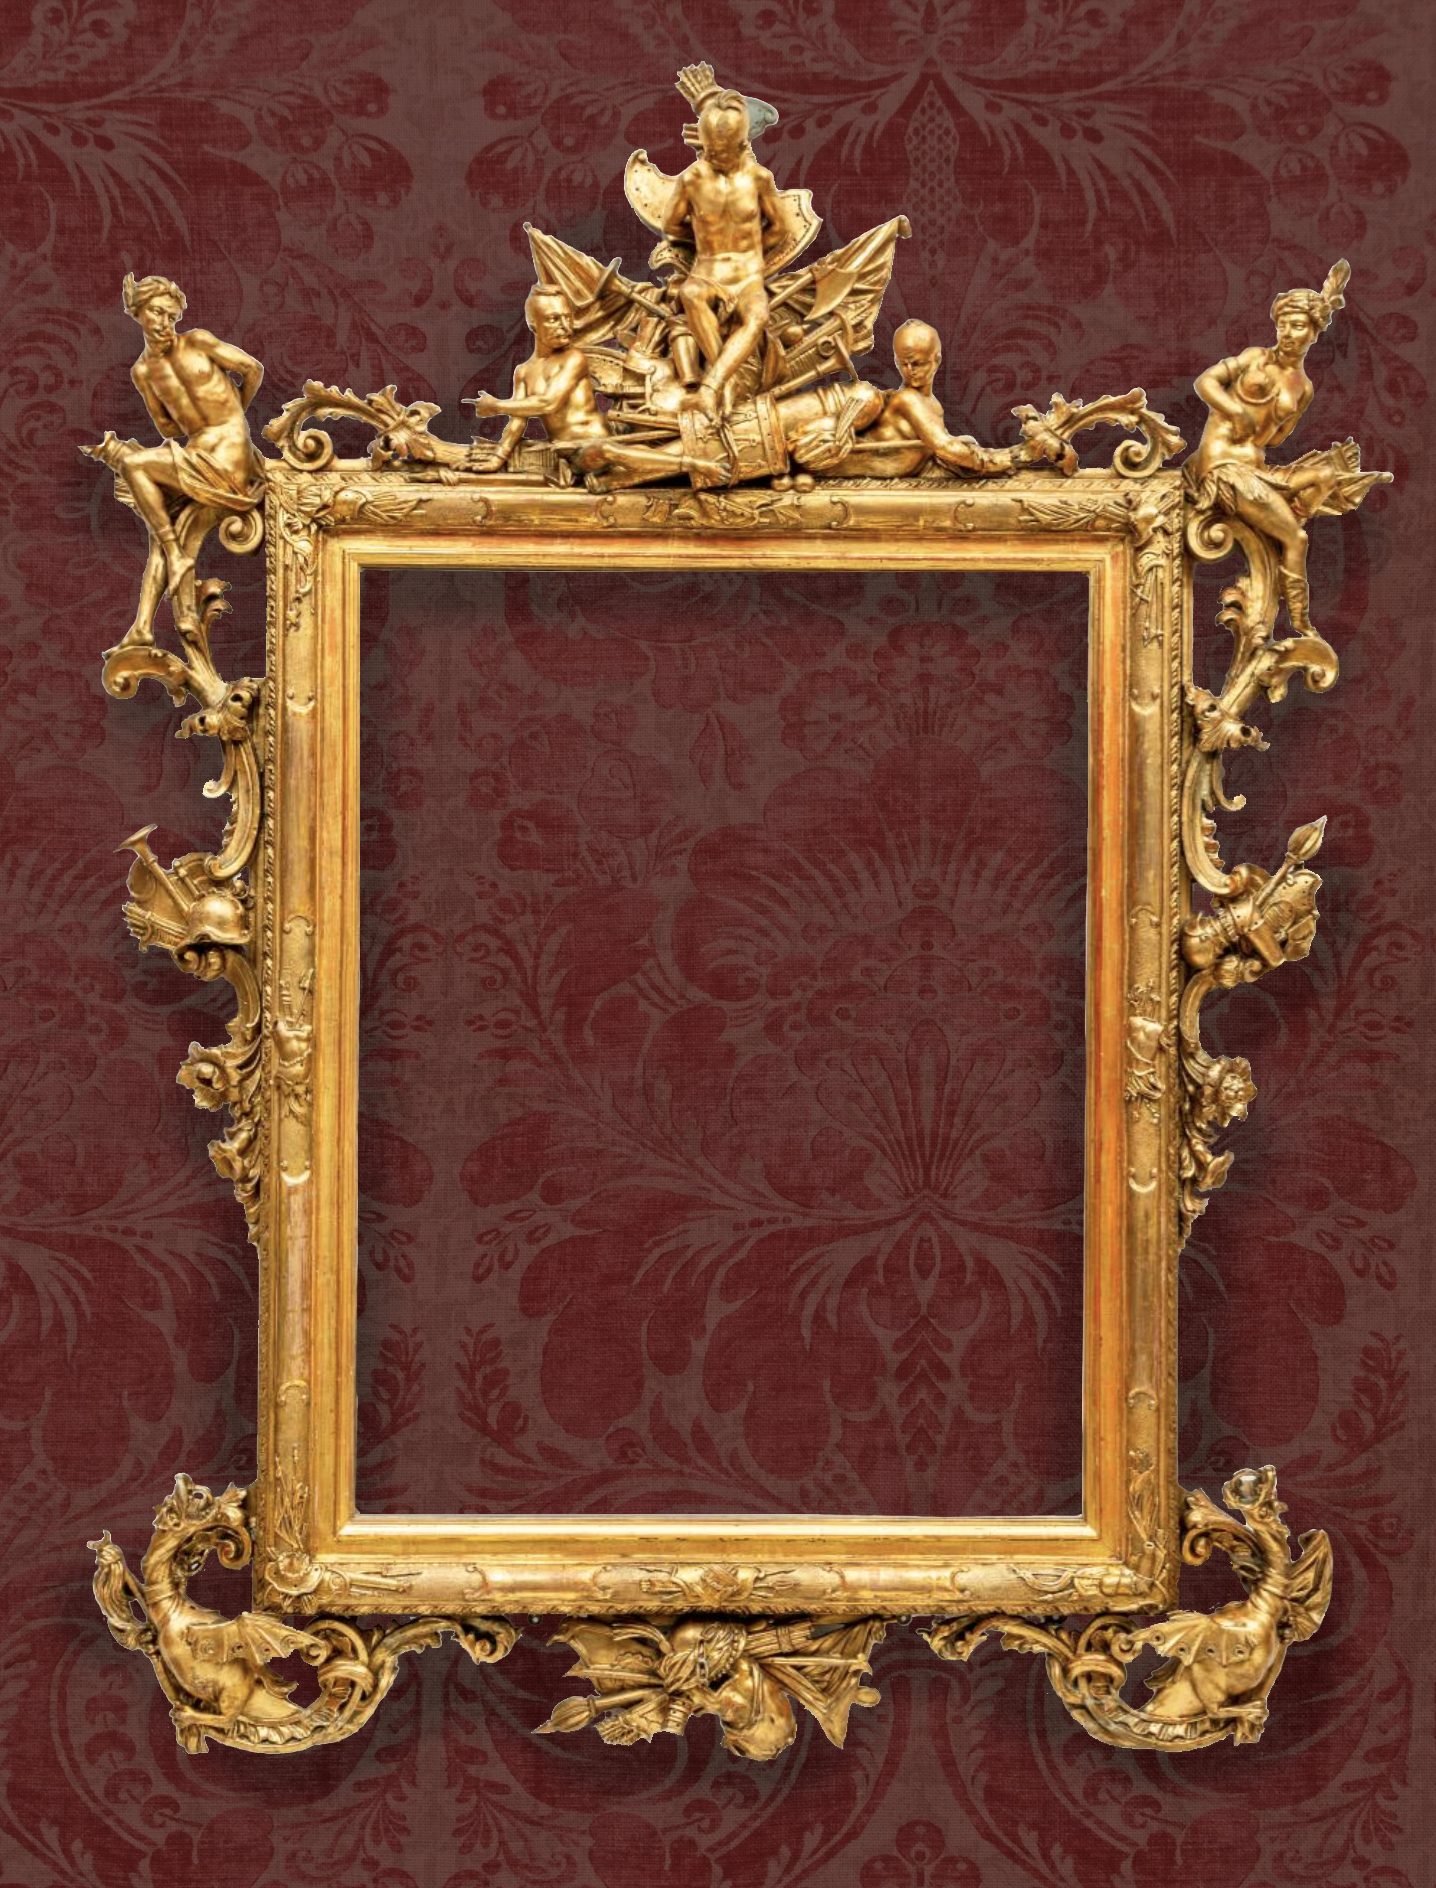 An intriguing Venetian trophy frame, linked to the Battle of Lepanto